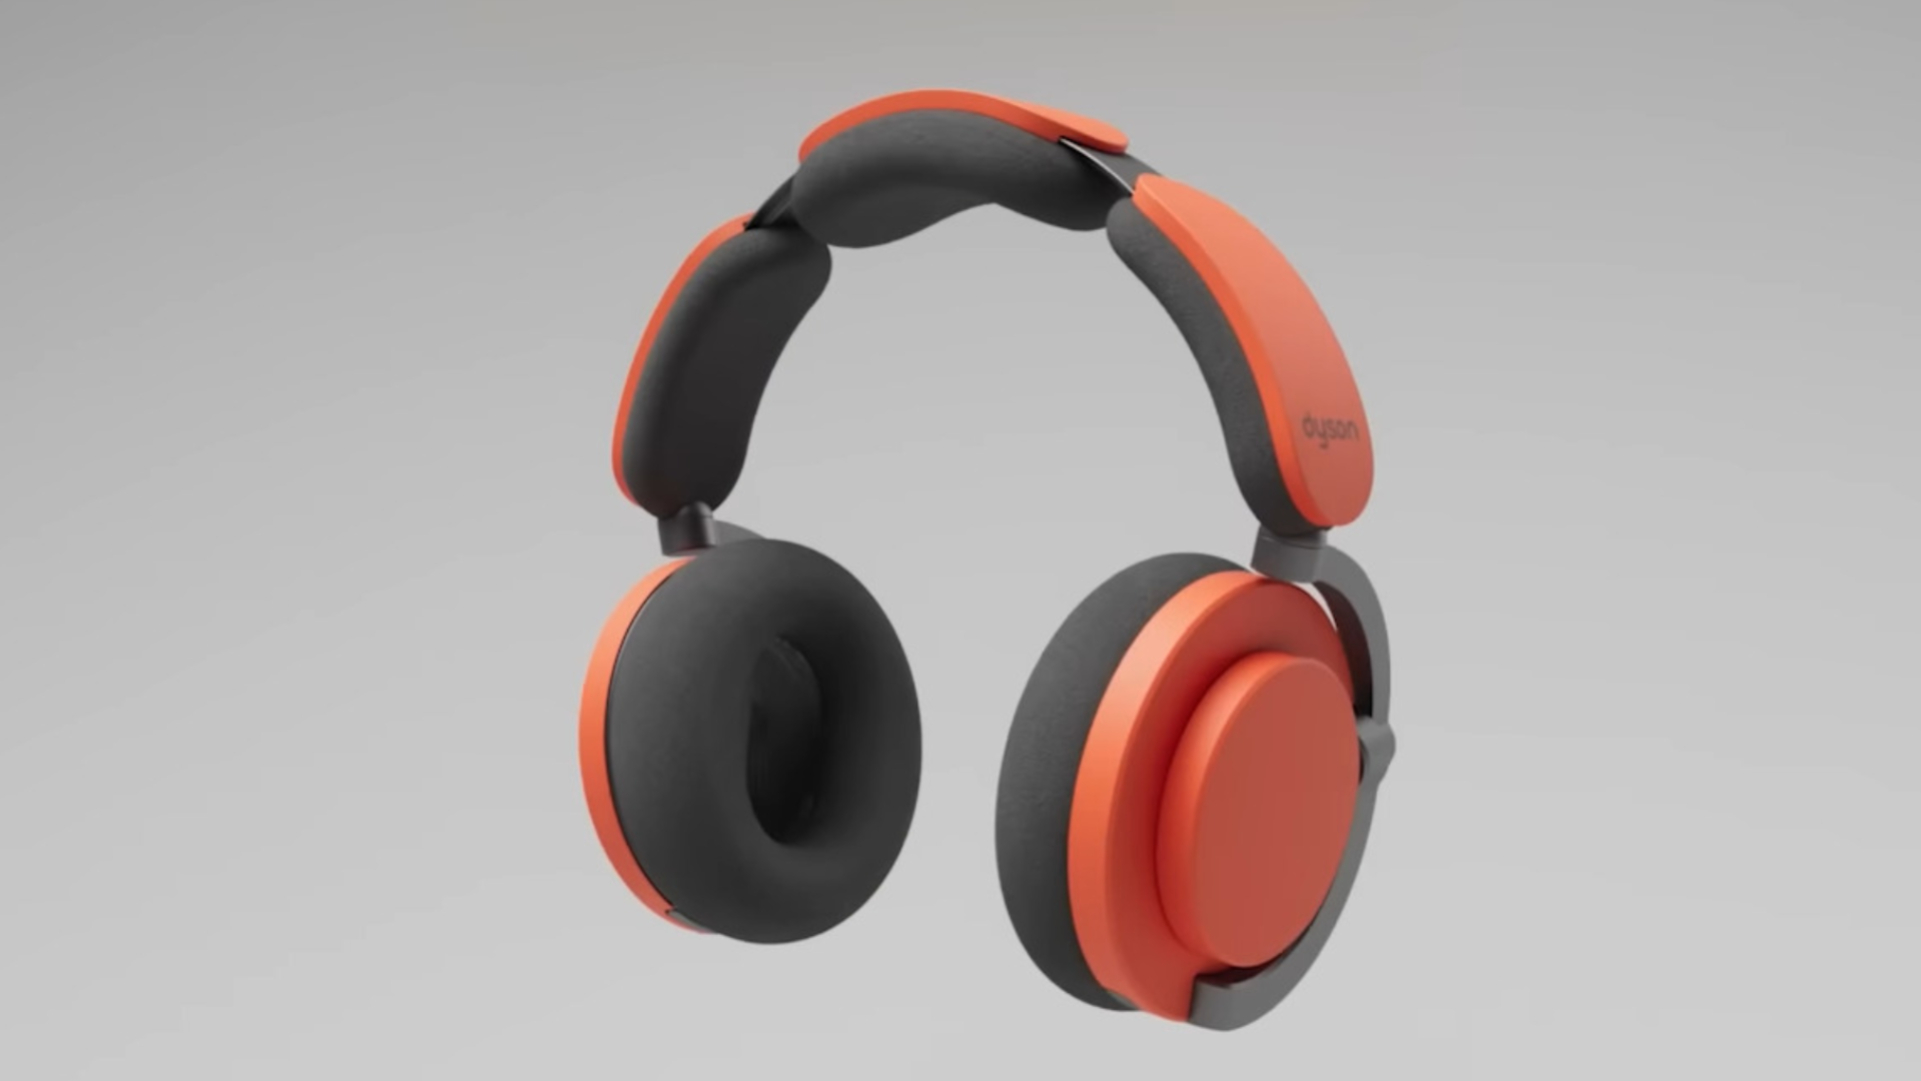 The Dyson Ontrac headphones in orange, shown from the front